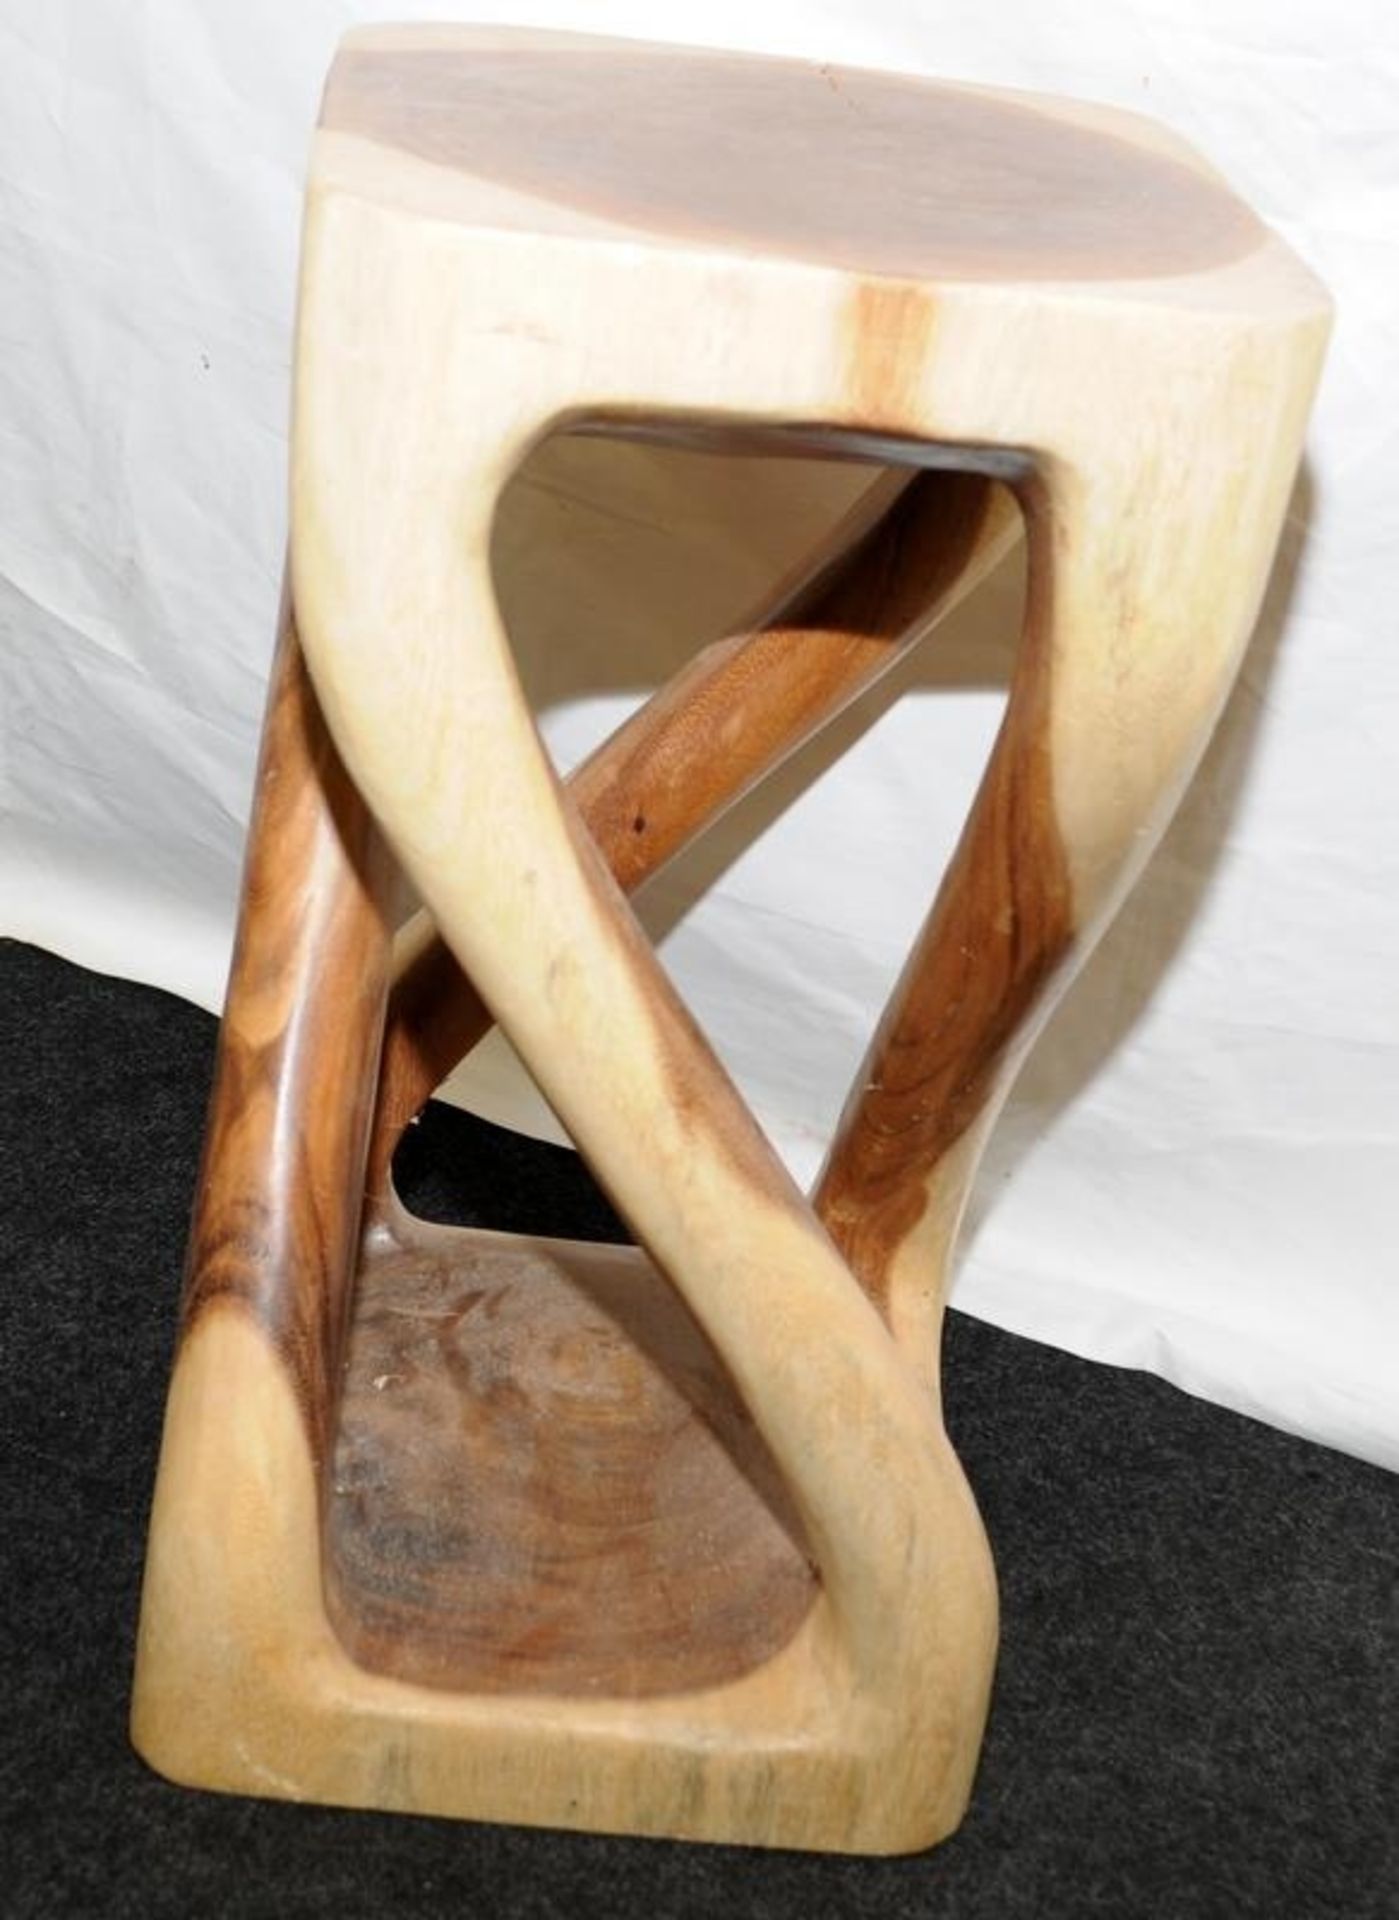 Wooden stool, seat height 51cms, hewn from a single piece of wood - Image 2 of 2